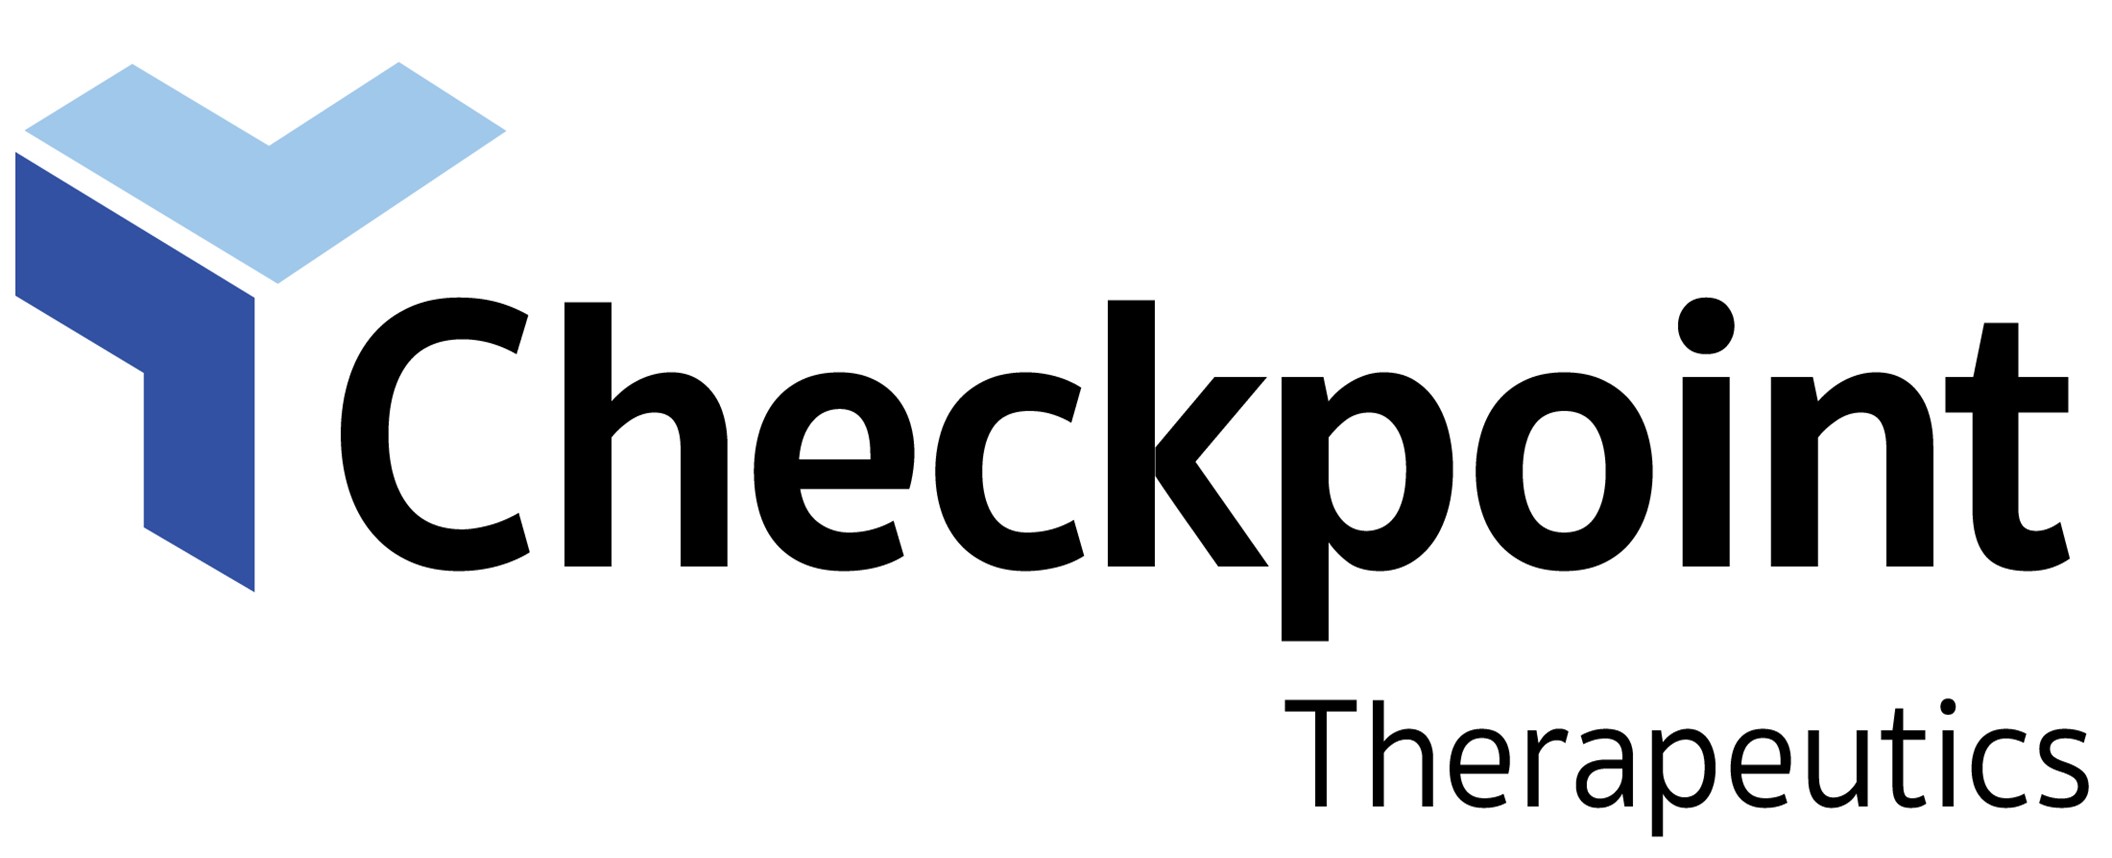 Checkpoint Therapeutics Announces FDA Filing Acceptance of Biologics License Application for Cosibelimab in Metastatic or Locally Advanced Cutaneous Squamous Cell Carcinoma